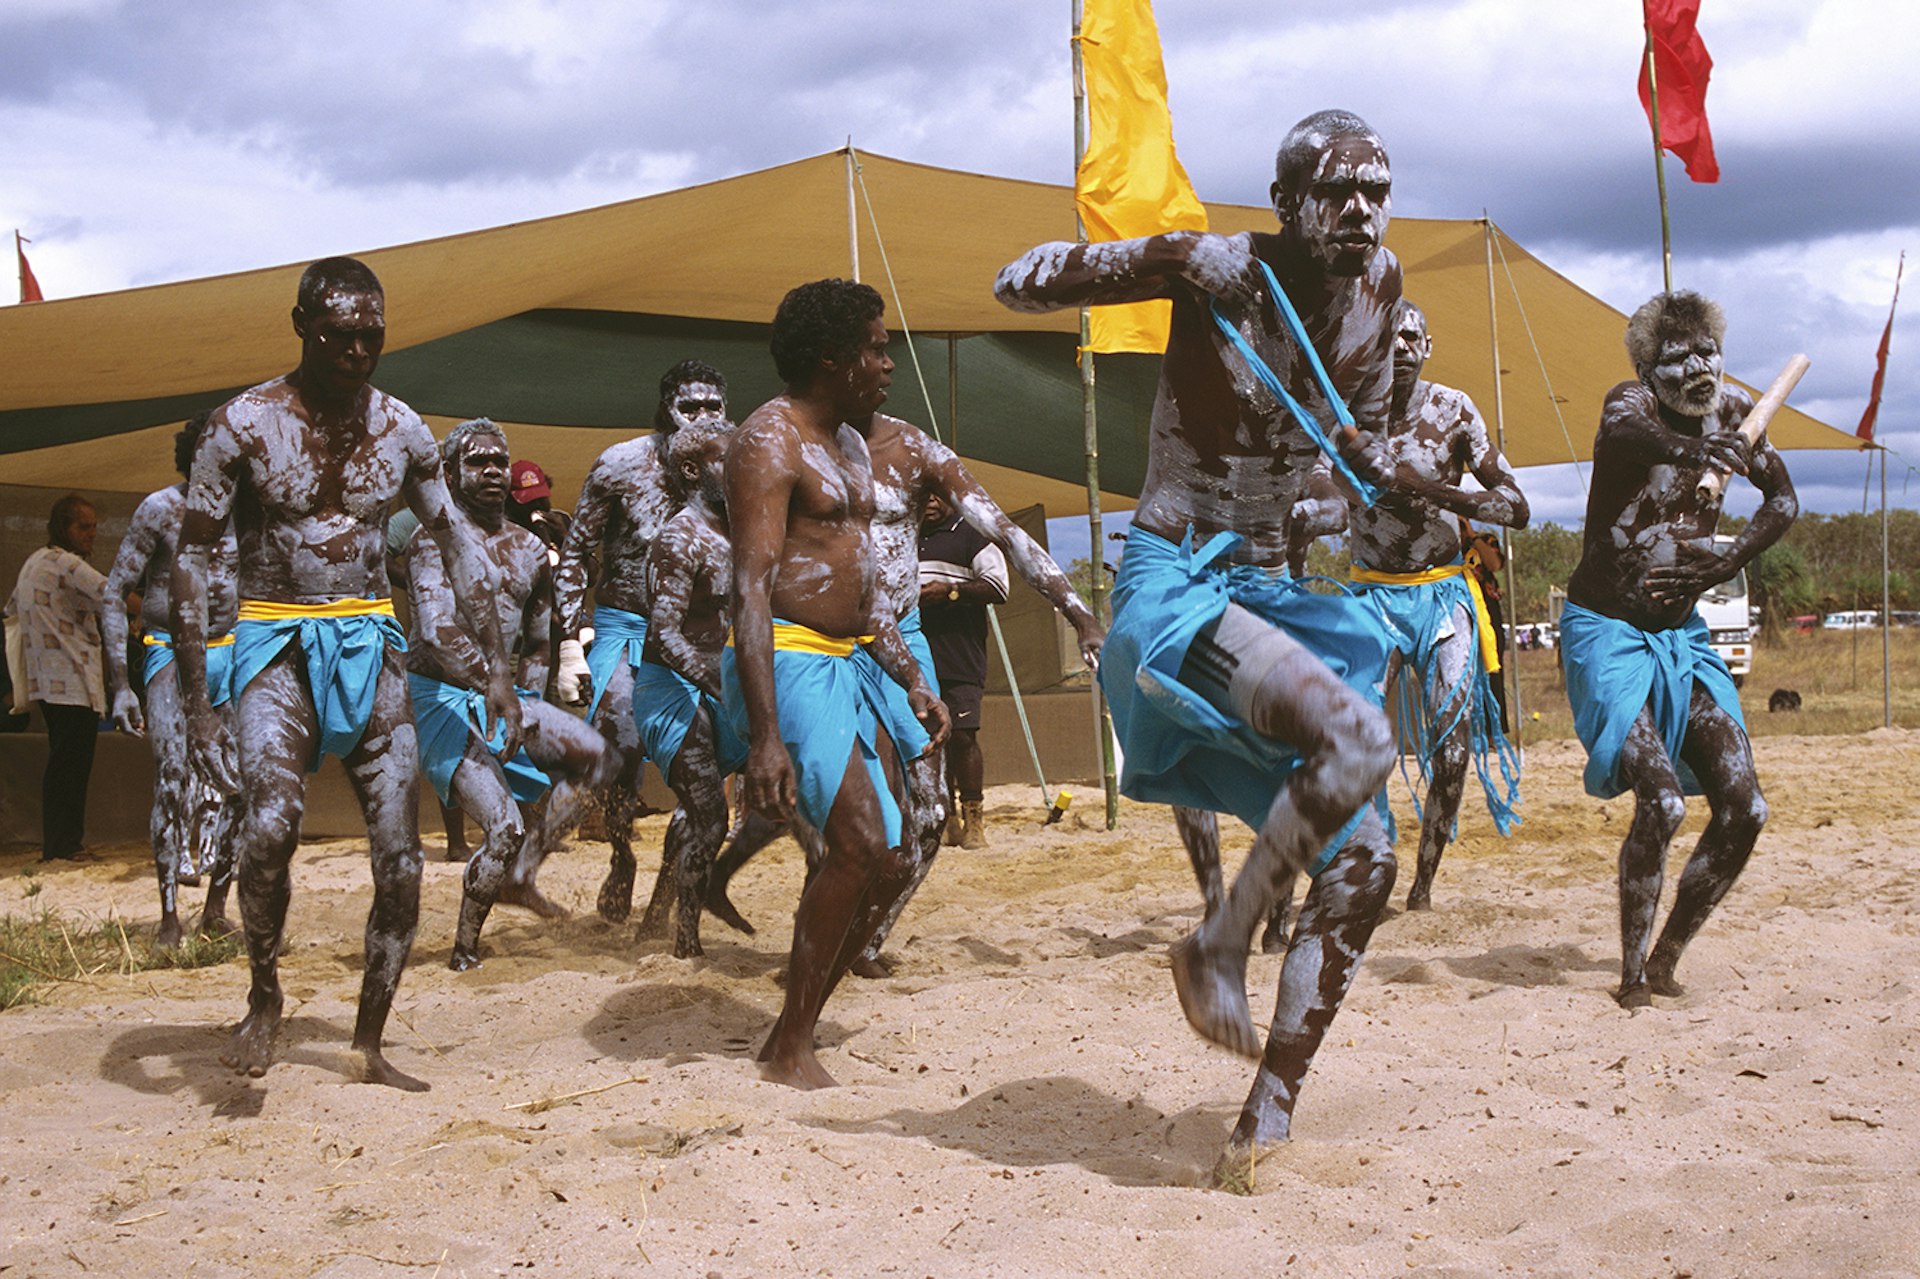 Experience the profound connection between country, spirit and Aboriginal Dreaming in Arnhem Land. Image by Auscape / UIG / Universal Images Group / Getty Images